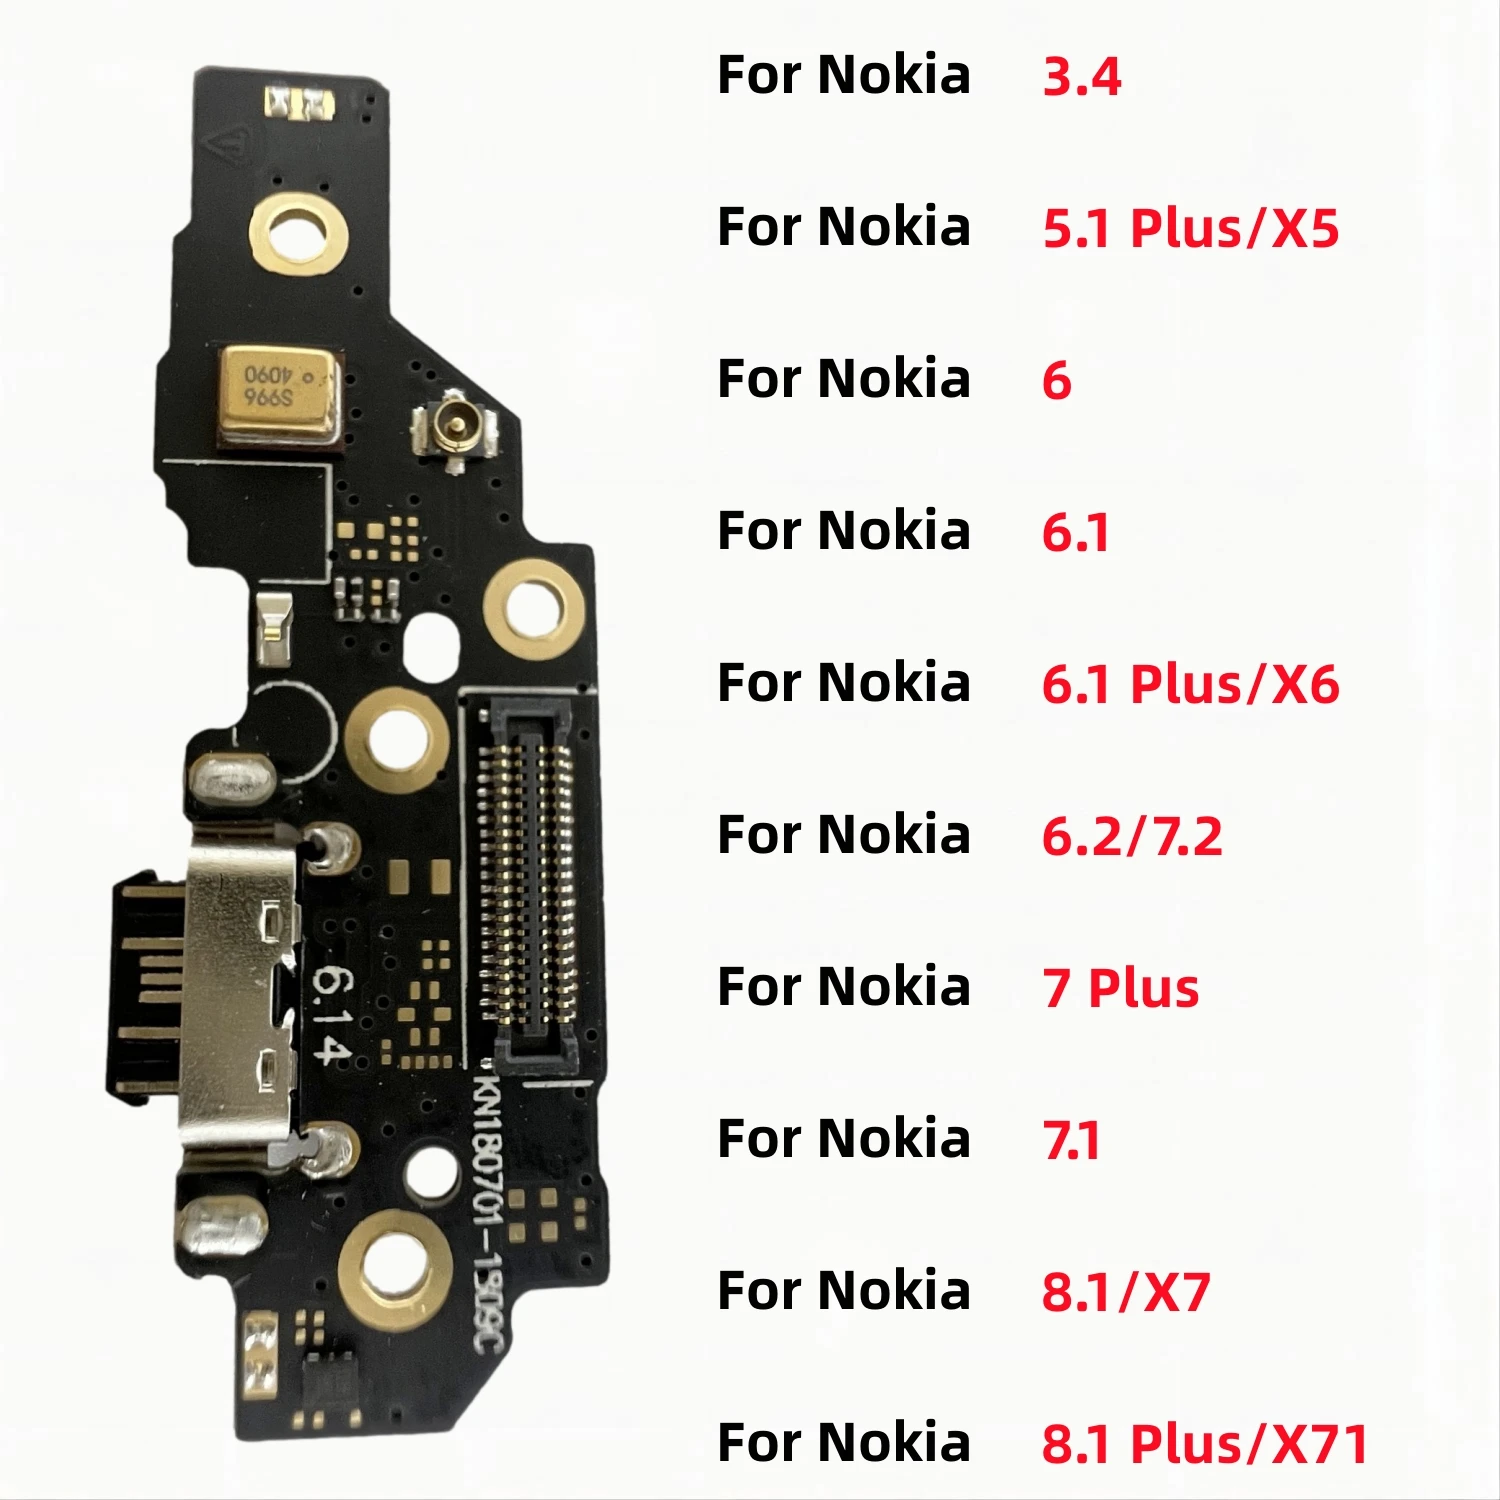 

USB Charger Dock Connector Board Charging Port Flex Cable For Nokia 3.4 6 6.1 6.2 7.2 7.1 8.1 X7 5.1 6.1 7 8.1 Plus X5 X6 X71